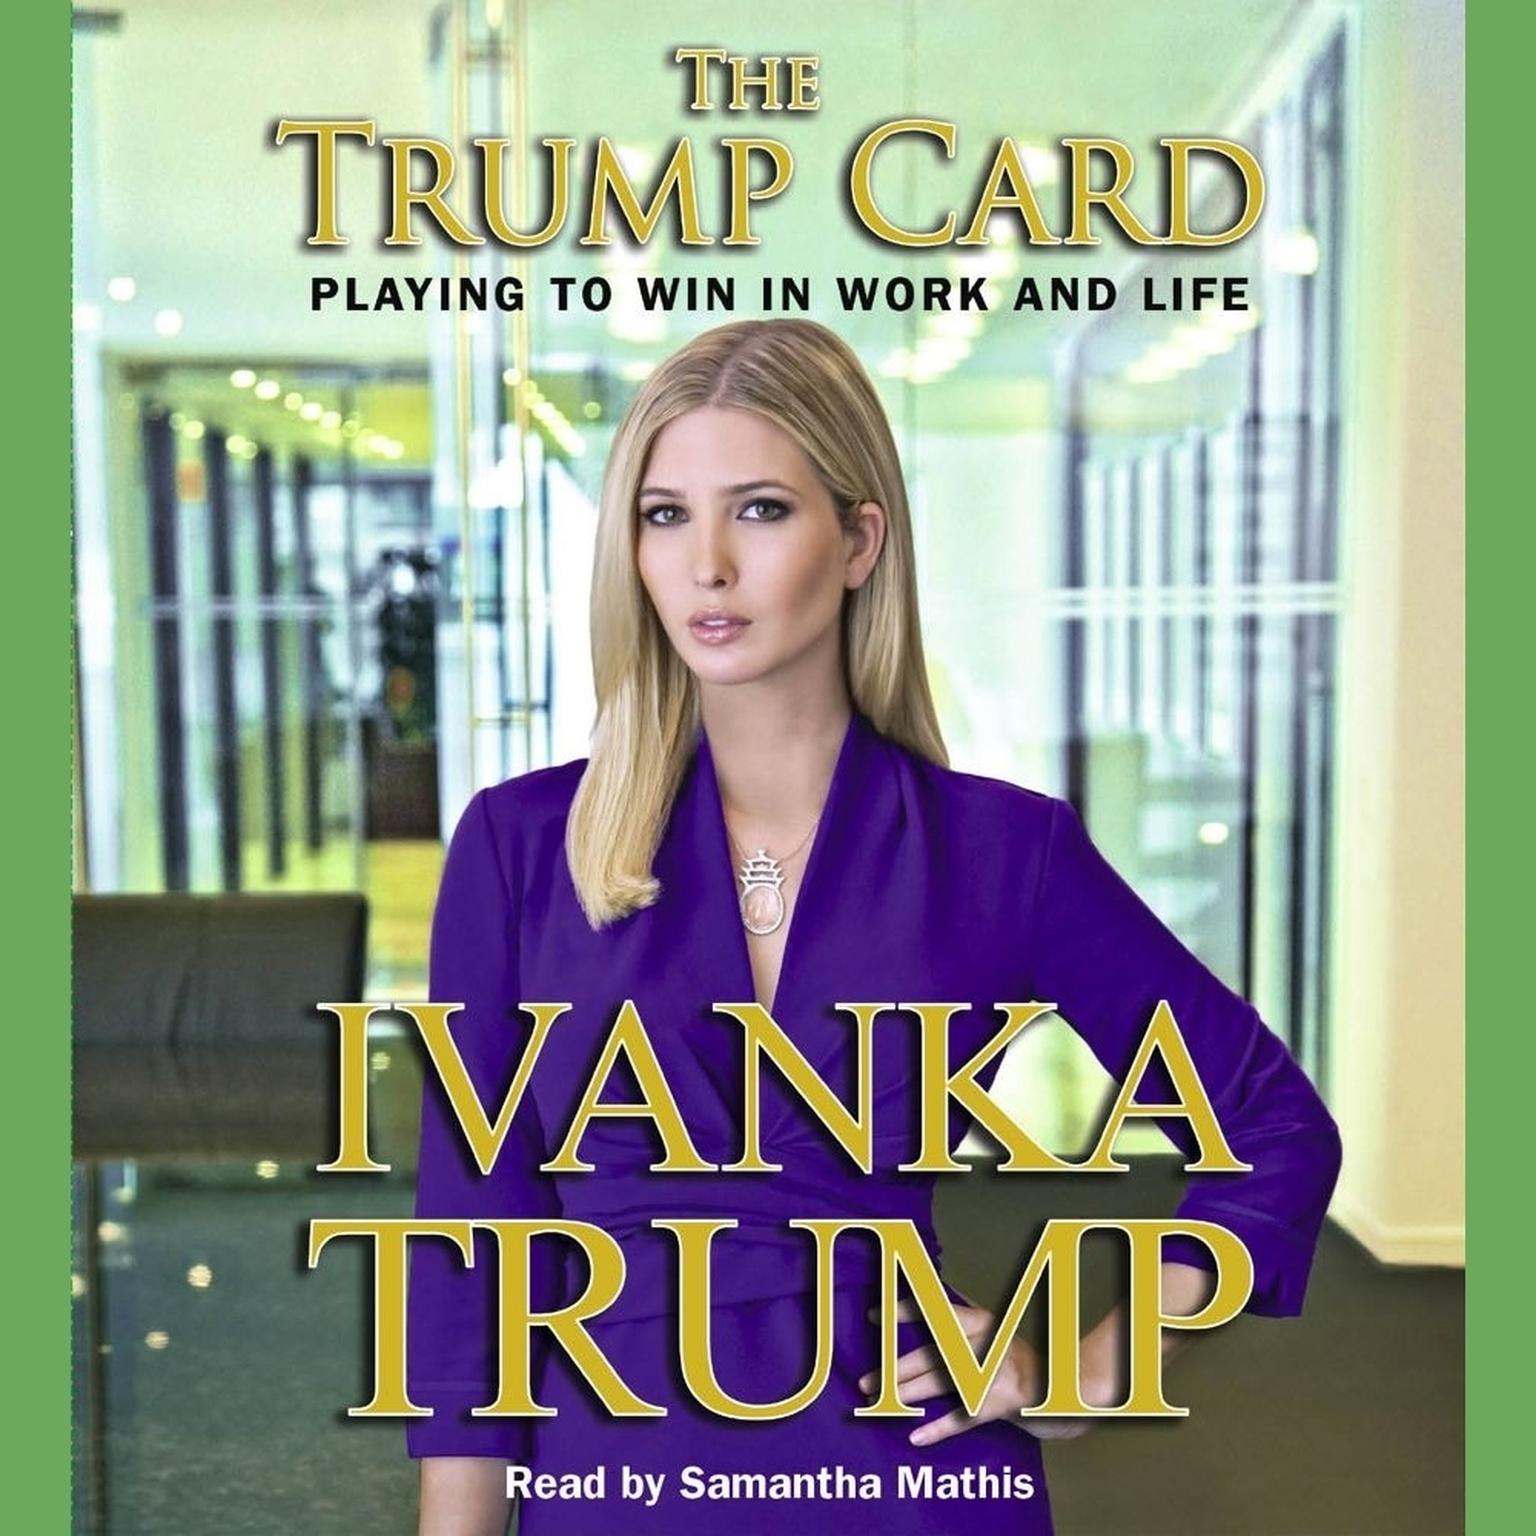 Trump Card (Abridged): Playing to Win in Work and Life Audiobook, by Ivanka Trump